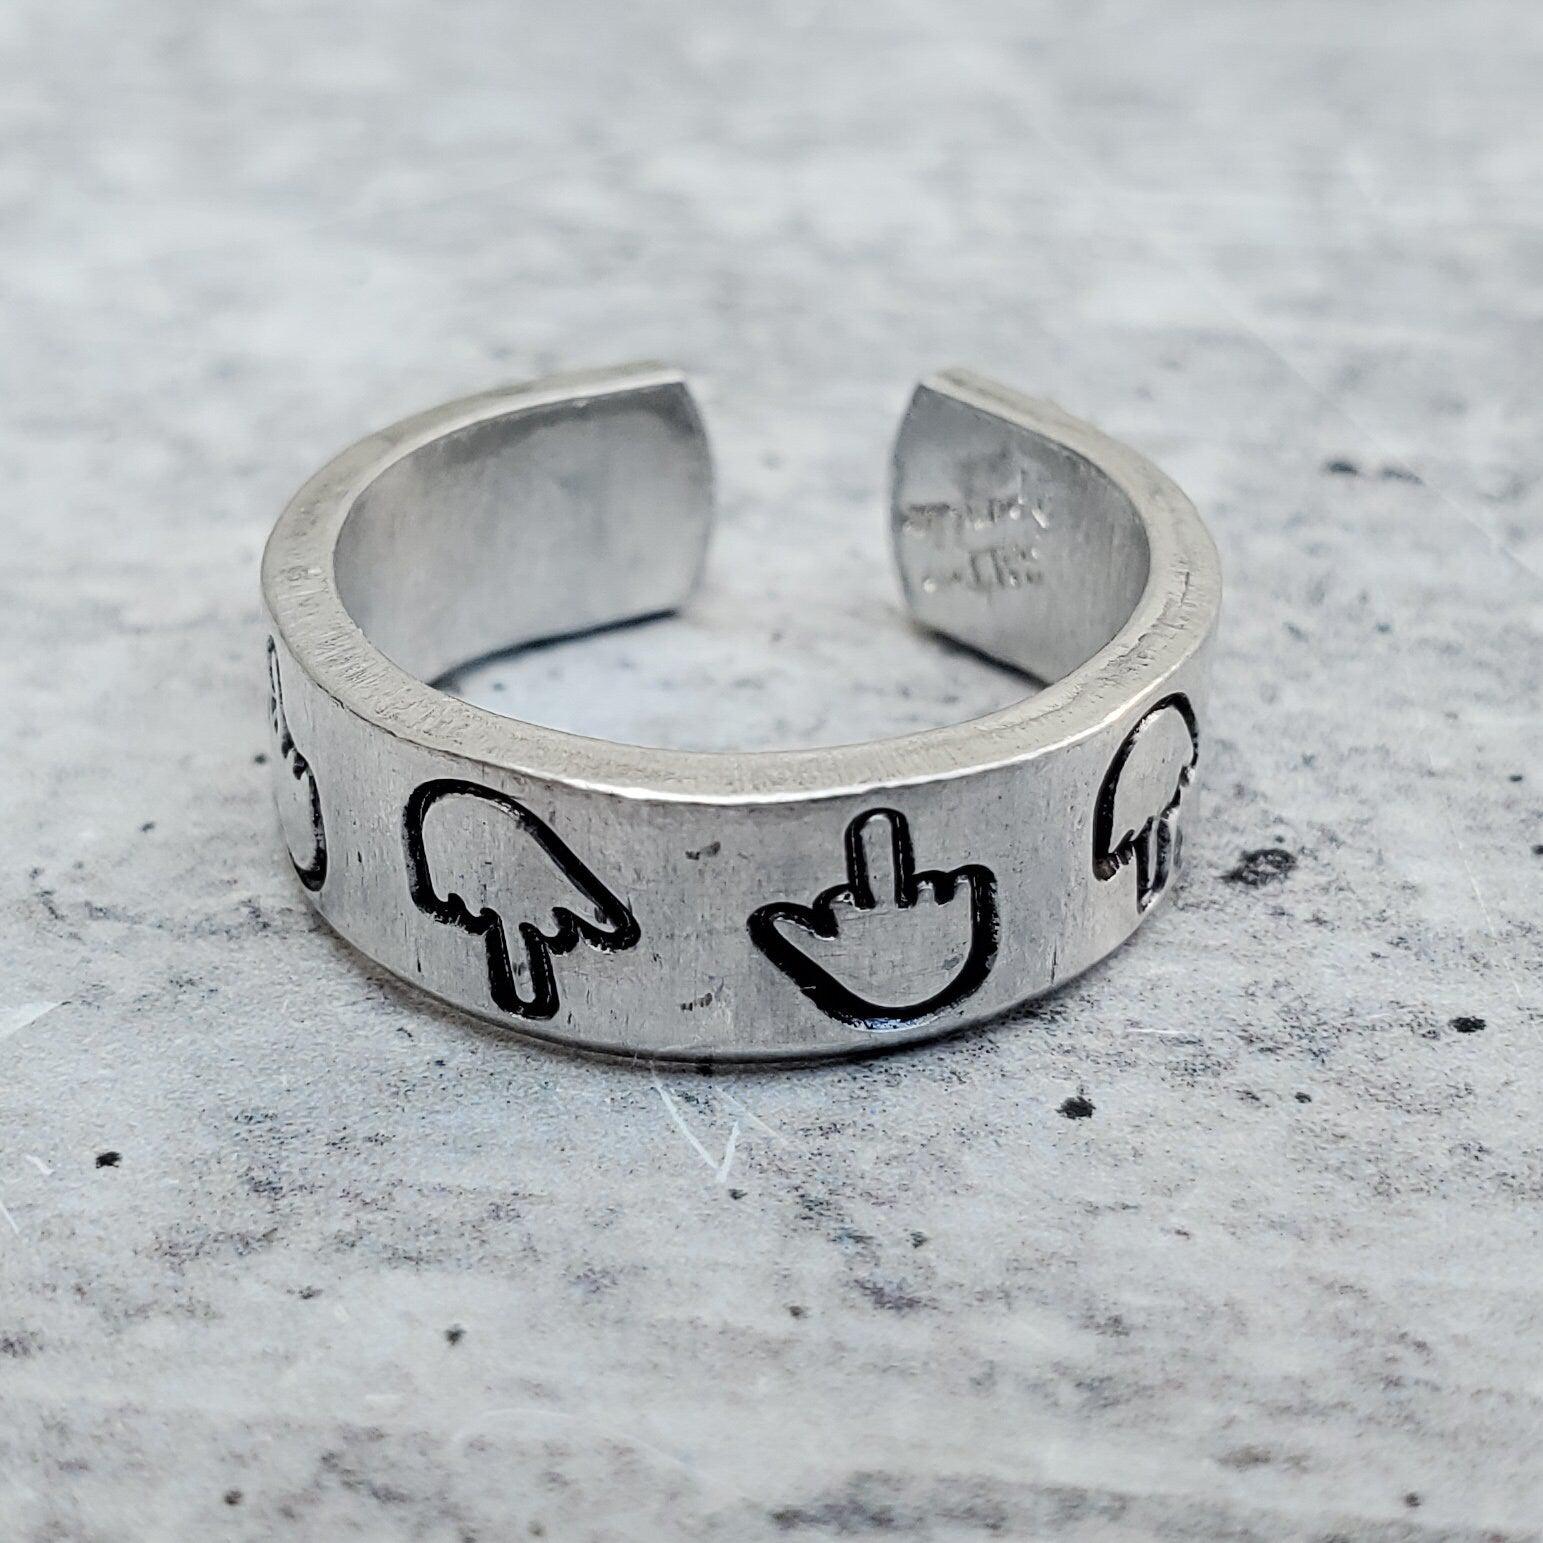 Middle Finger THIN Band Ring - F Off Funny Jewelry - F*ck You Ring for Friend - His and Hers Matching Rings - Gender Neutral Silver Ring